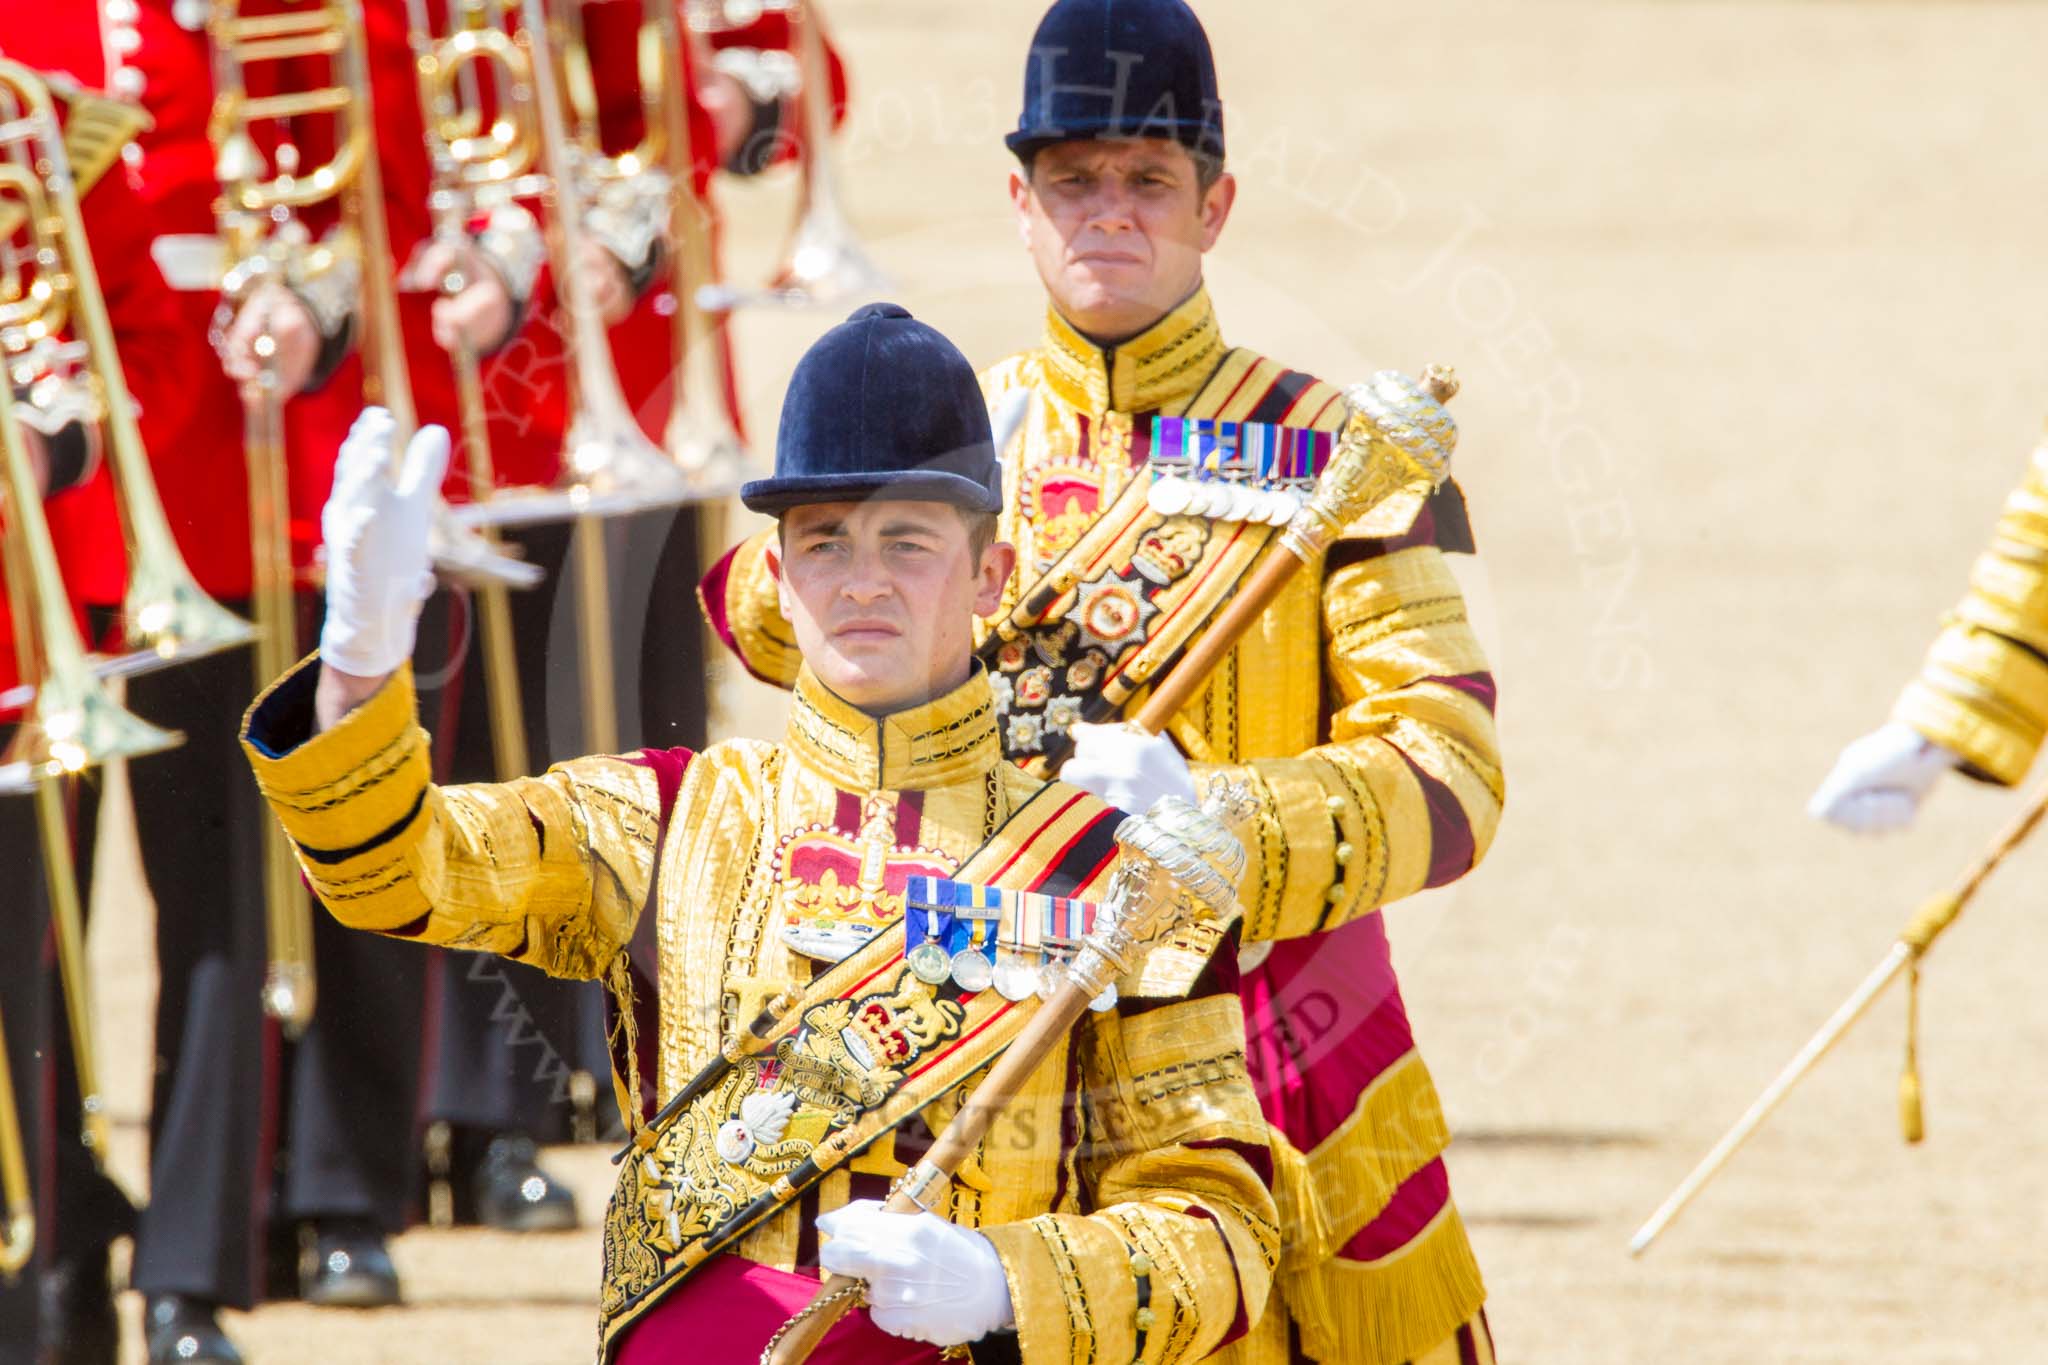 Trooping the Colour 2013: Drum Major D P Thomas, Grenadier Guards, and Senior Drum Major M J Betts, Grenadier Guards..
Horse Guards Parade, Westminster,
London SW1,

United Kingdom,
on 15 June 2013 at 11:52, image #644